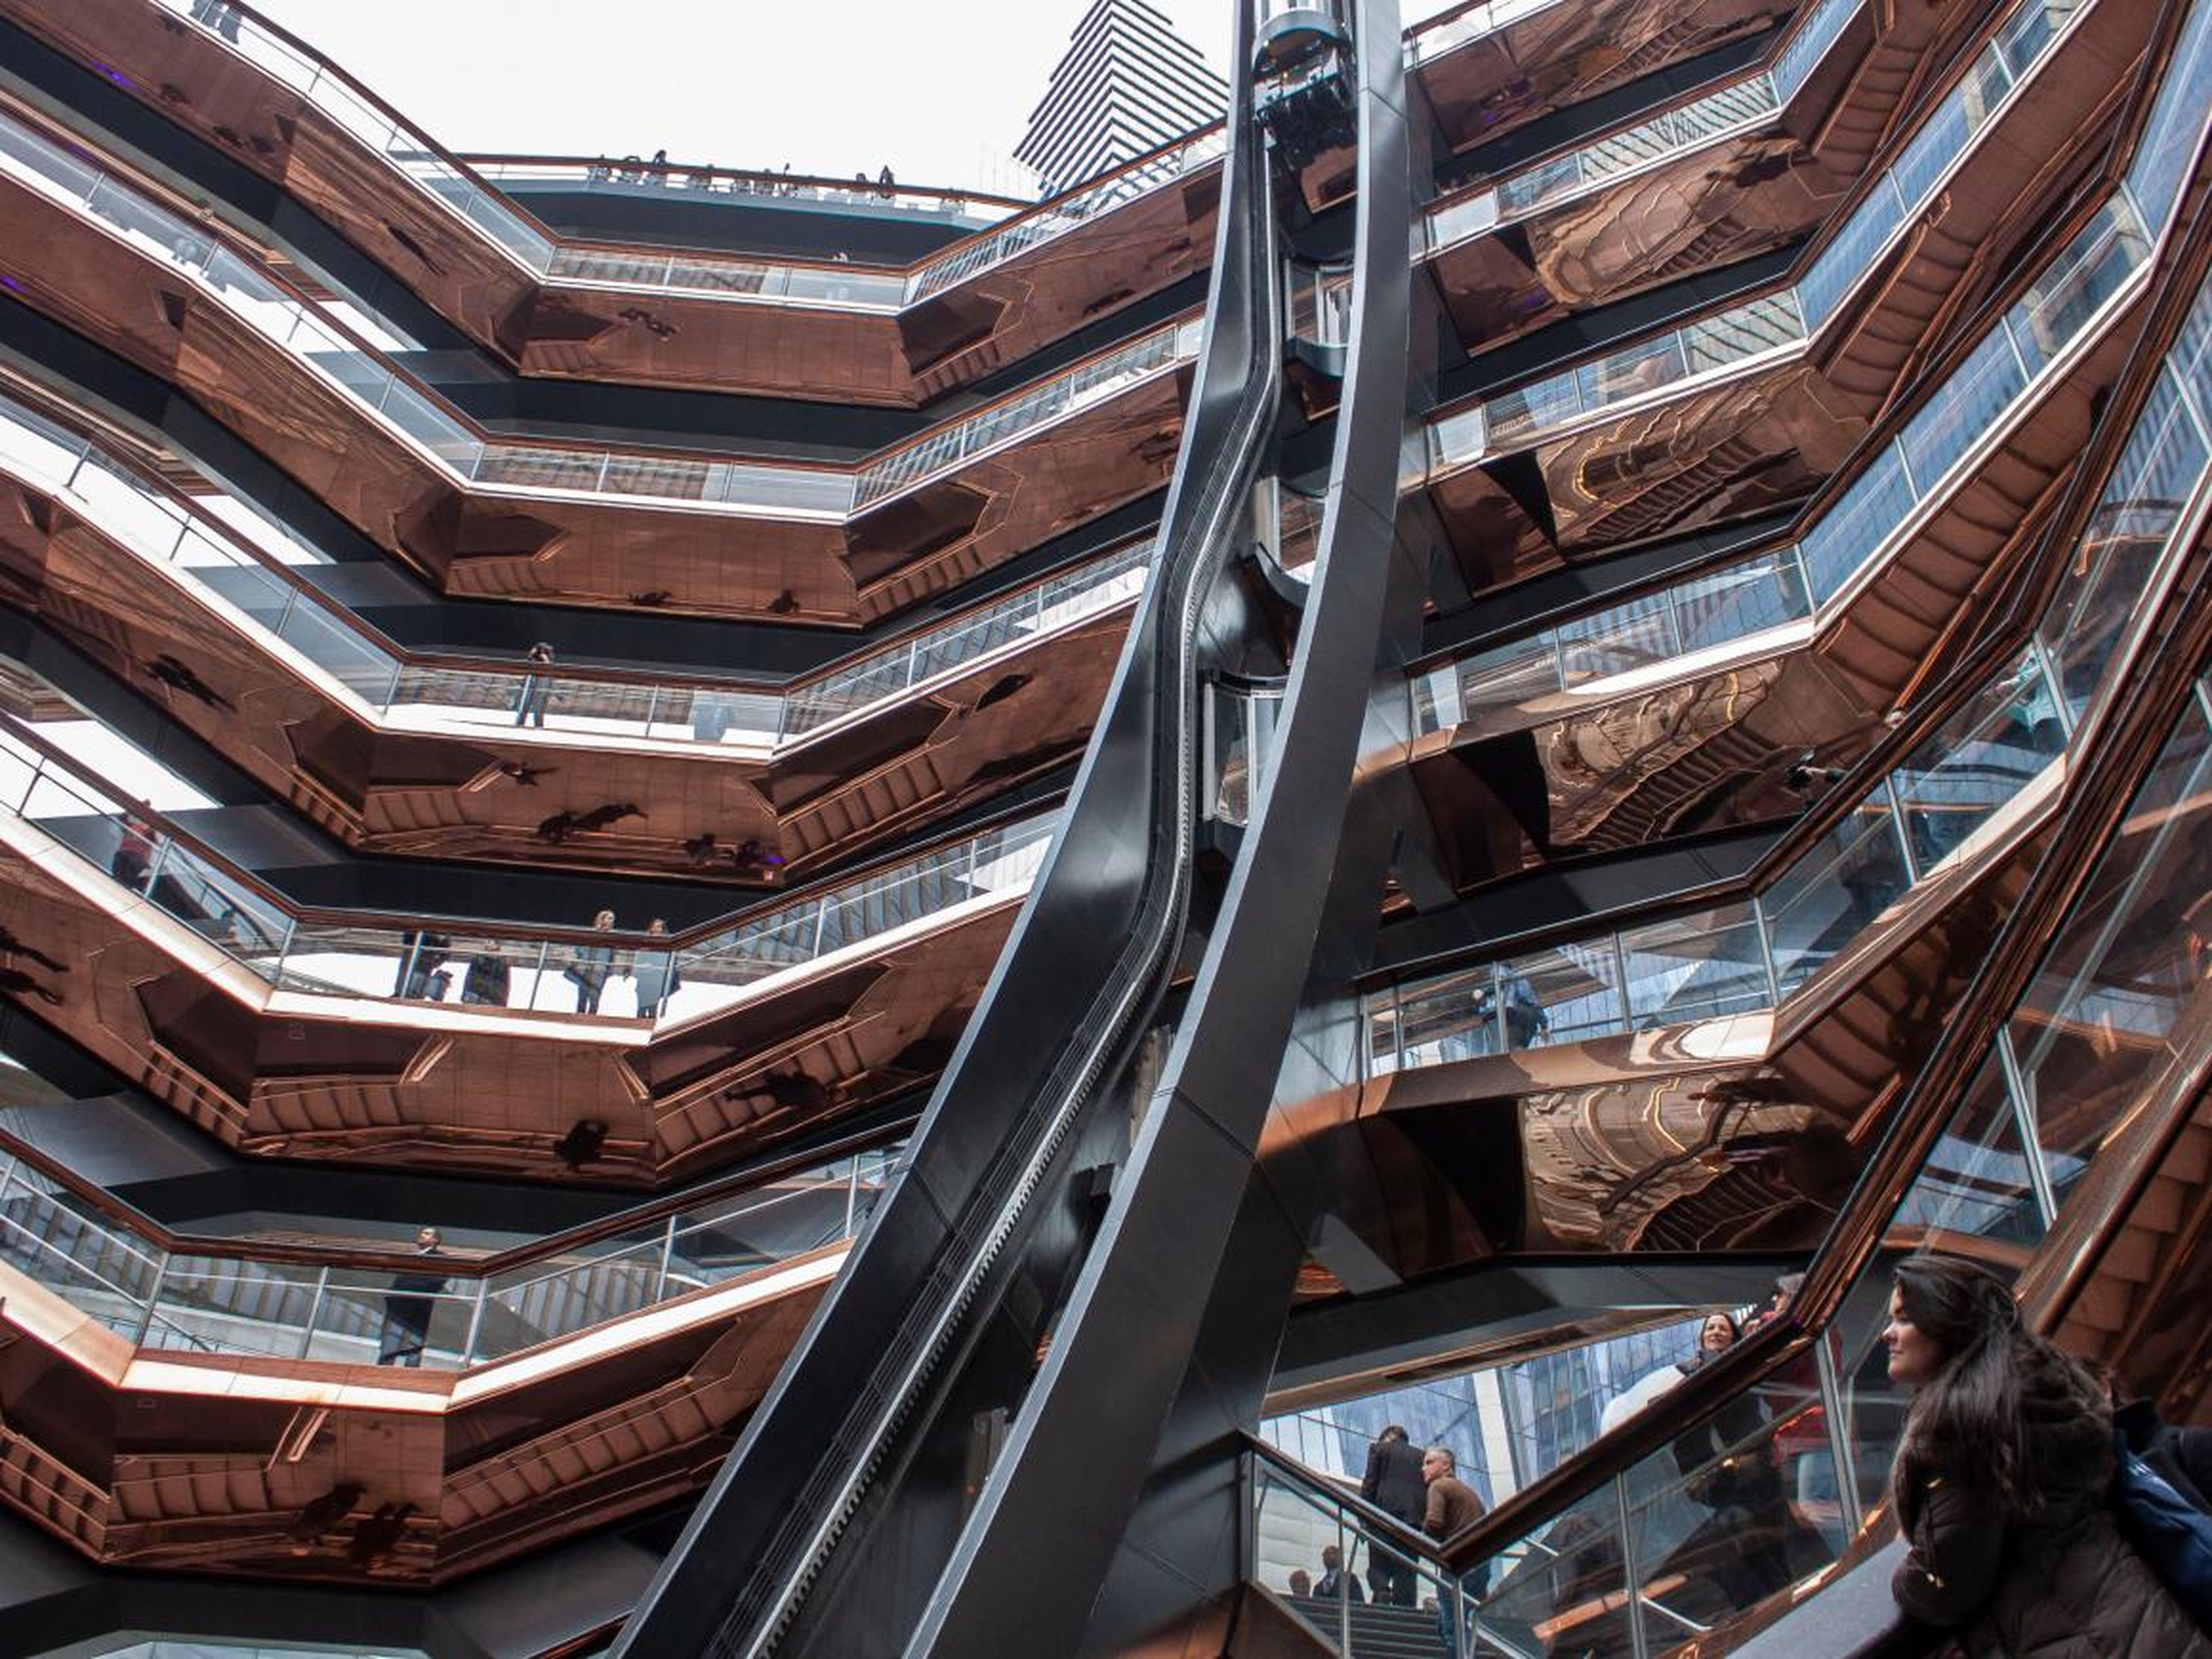 Designed by Thomas Heatherwick, the structure is made up of 154 interconnected stairways, nearly 2,500 individual steps, and 80 landings.